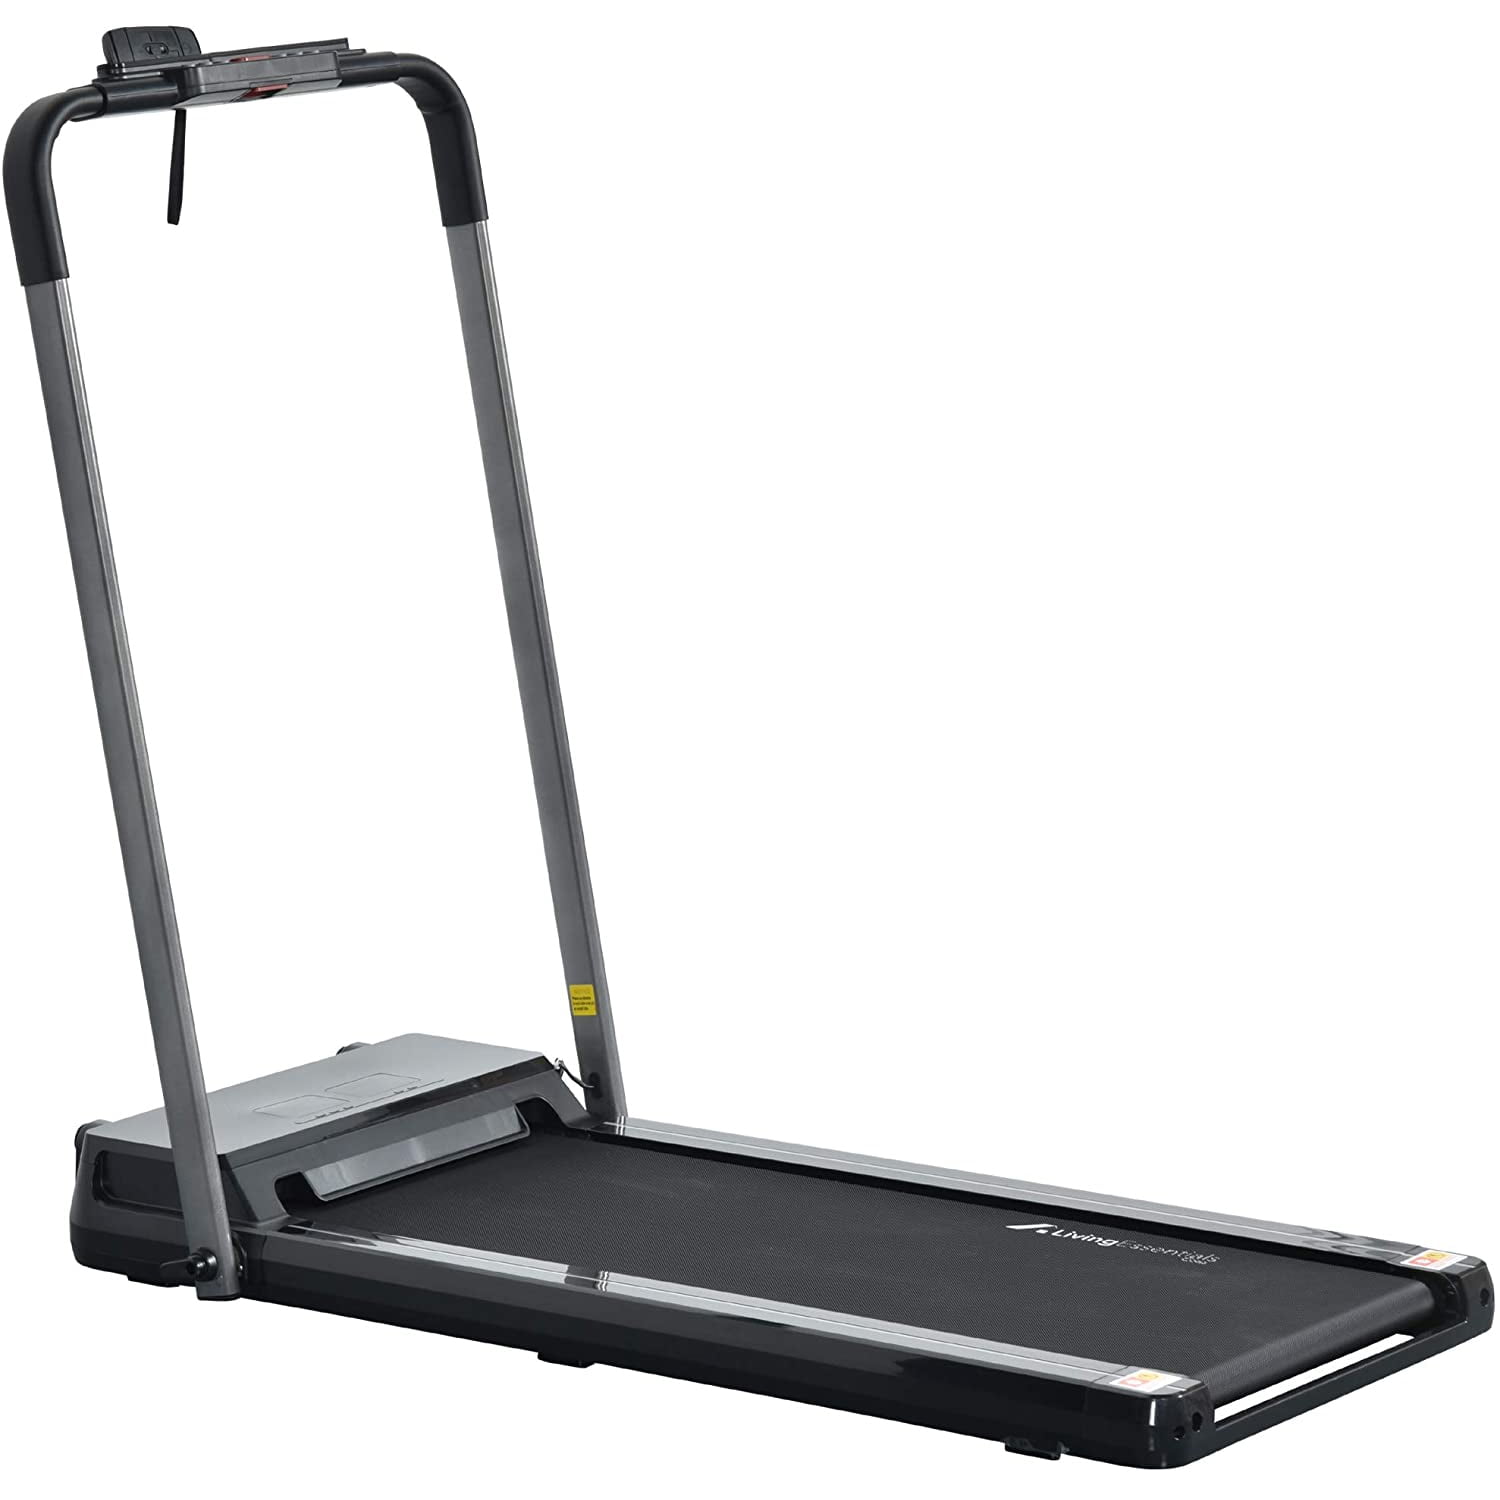 Living Essentials 2 in 1 Foldable Electric Treadmill Home Gym Exercise Equipment Walmart Canada